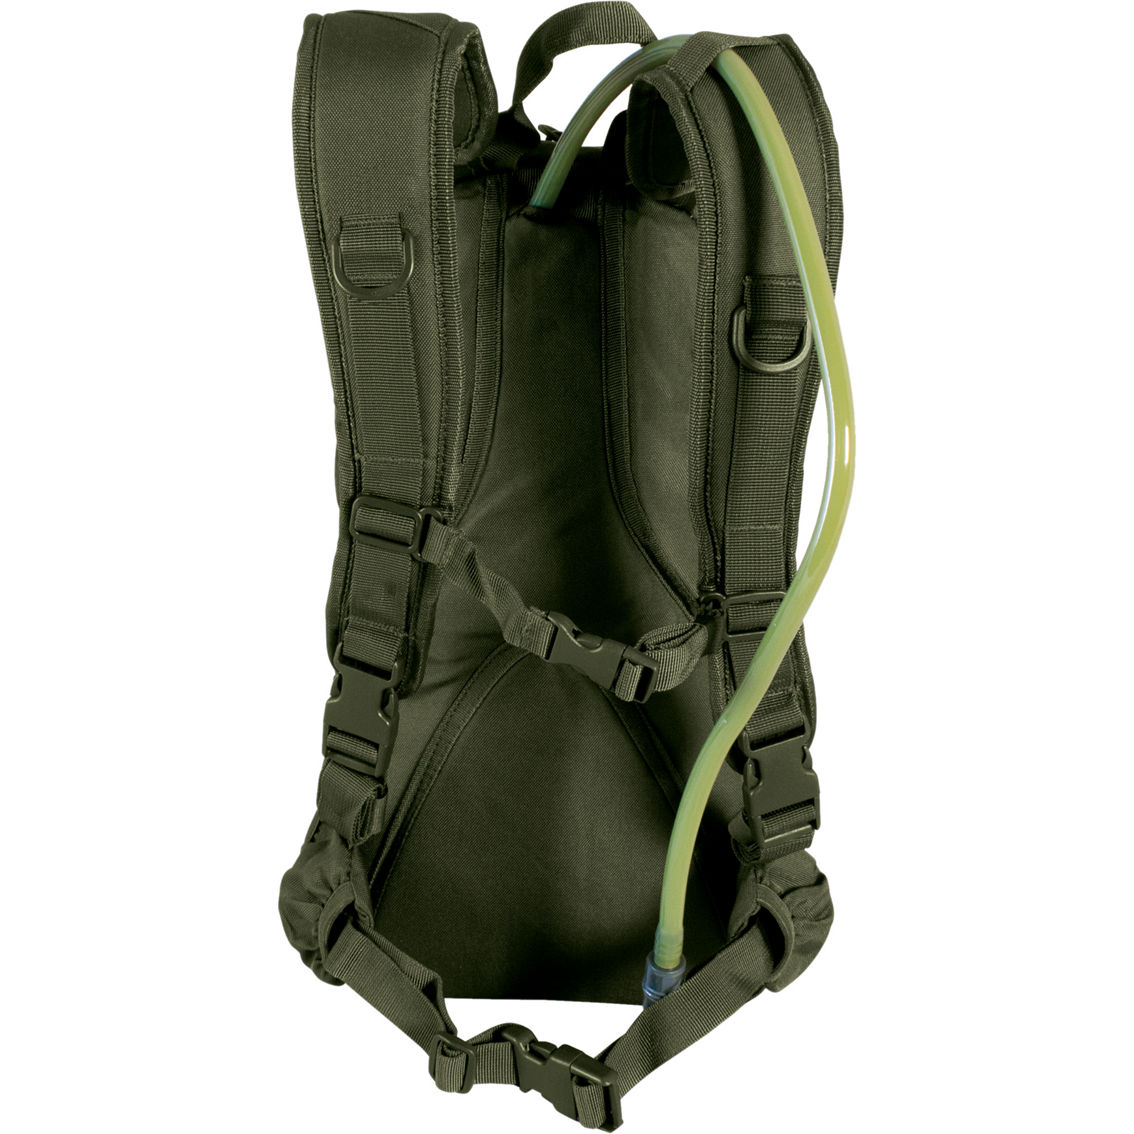 Red Rock Outdoor Gear Cactus Hydration Pack - Image 3 of 7